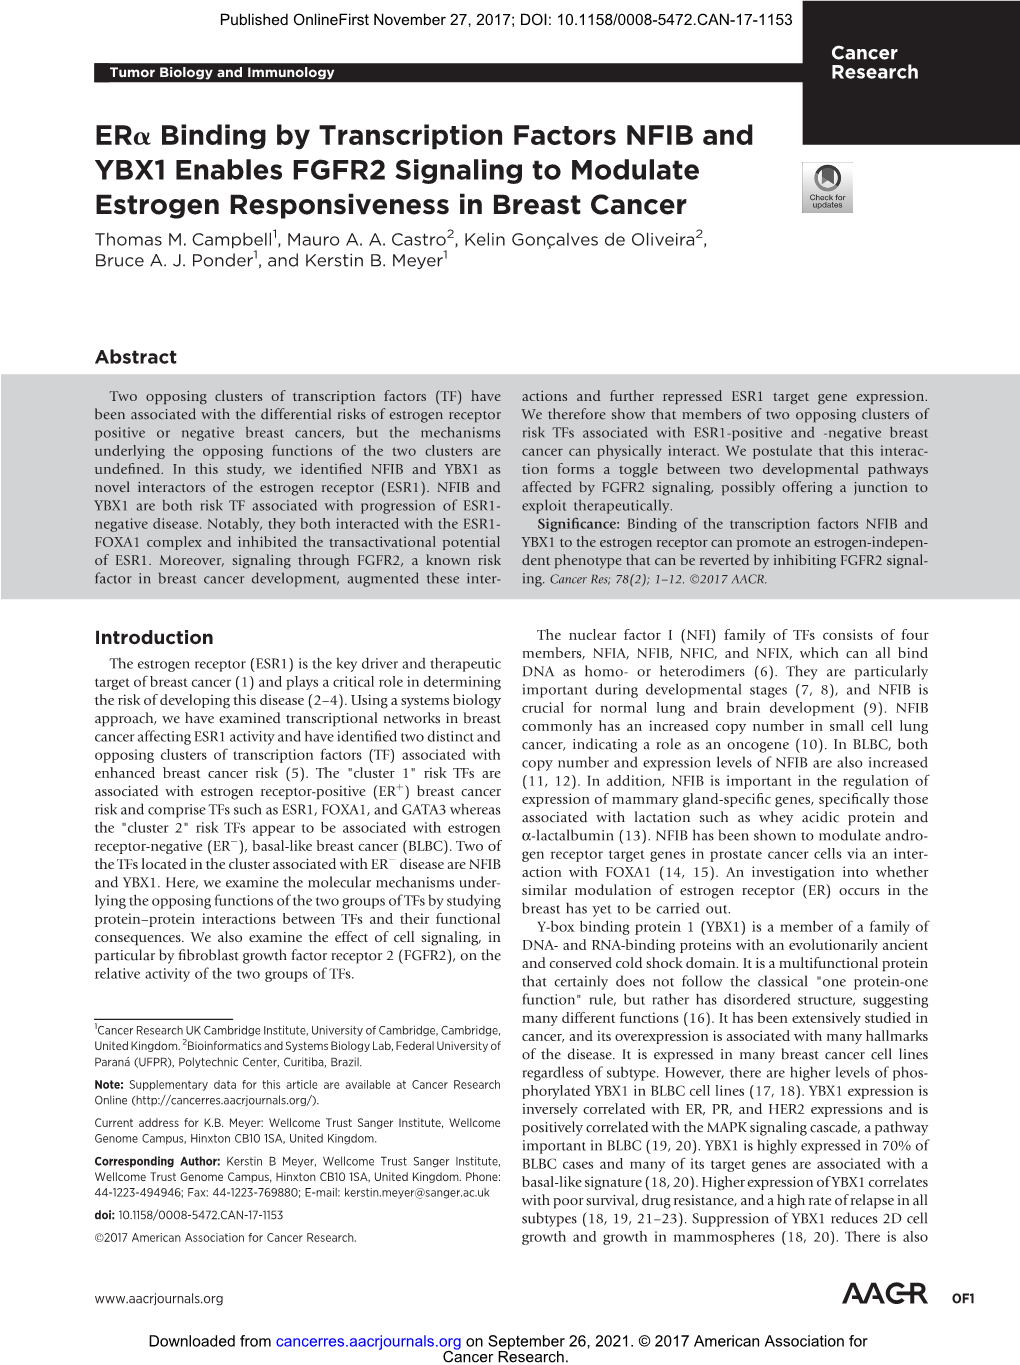 Erα Binding by Transcription Factors NFIB and YBX1 Enables FGFR2 Signaling to Modulate Estrogen Responsiveness in Breast Cancer